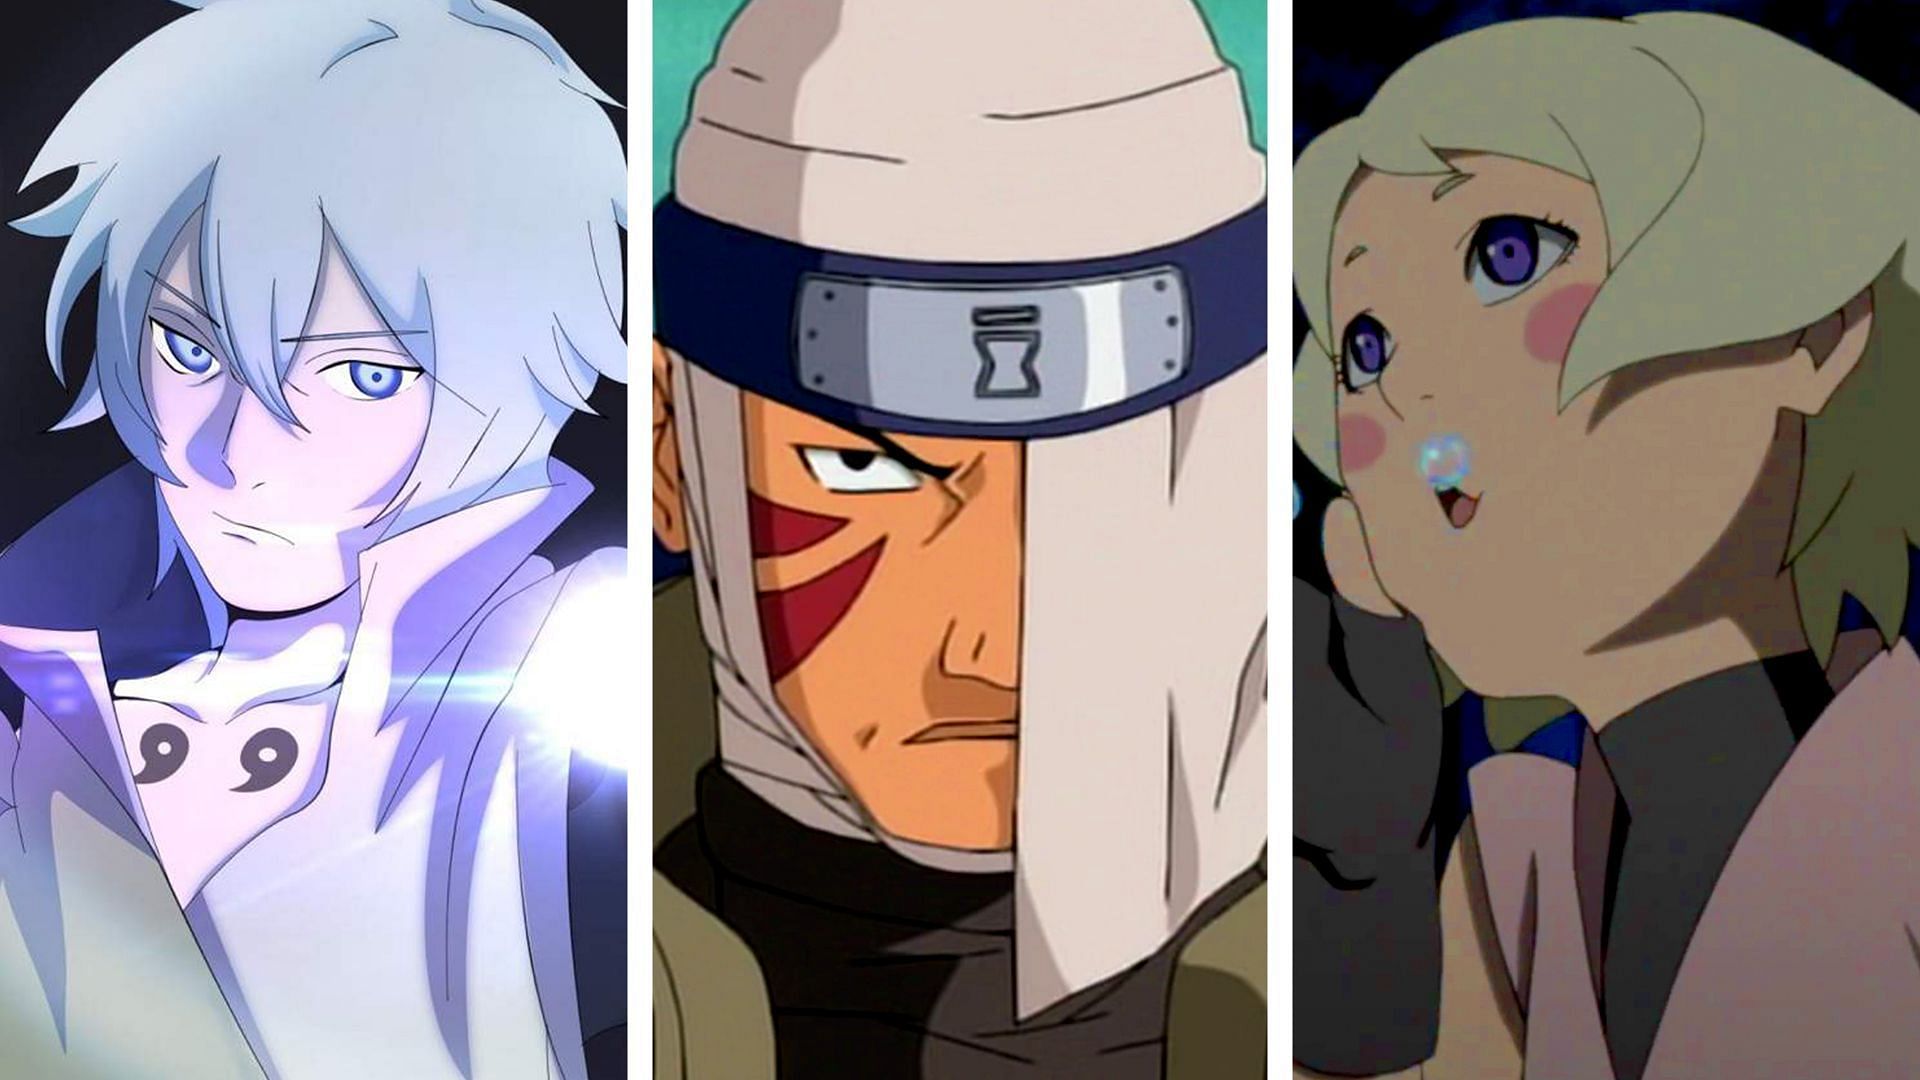 Who is Chino in Naruto?